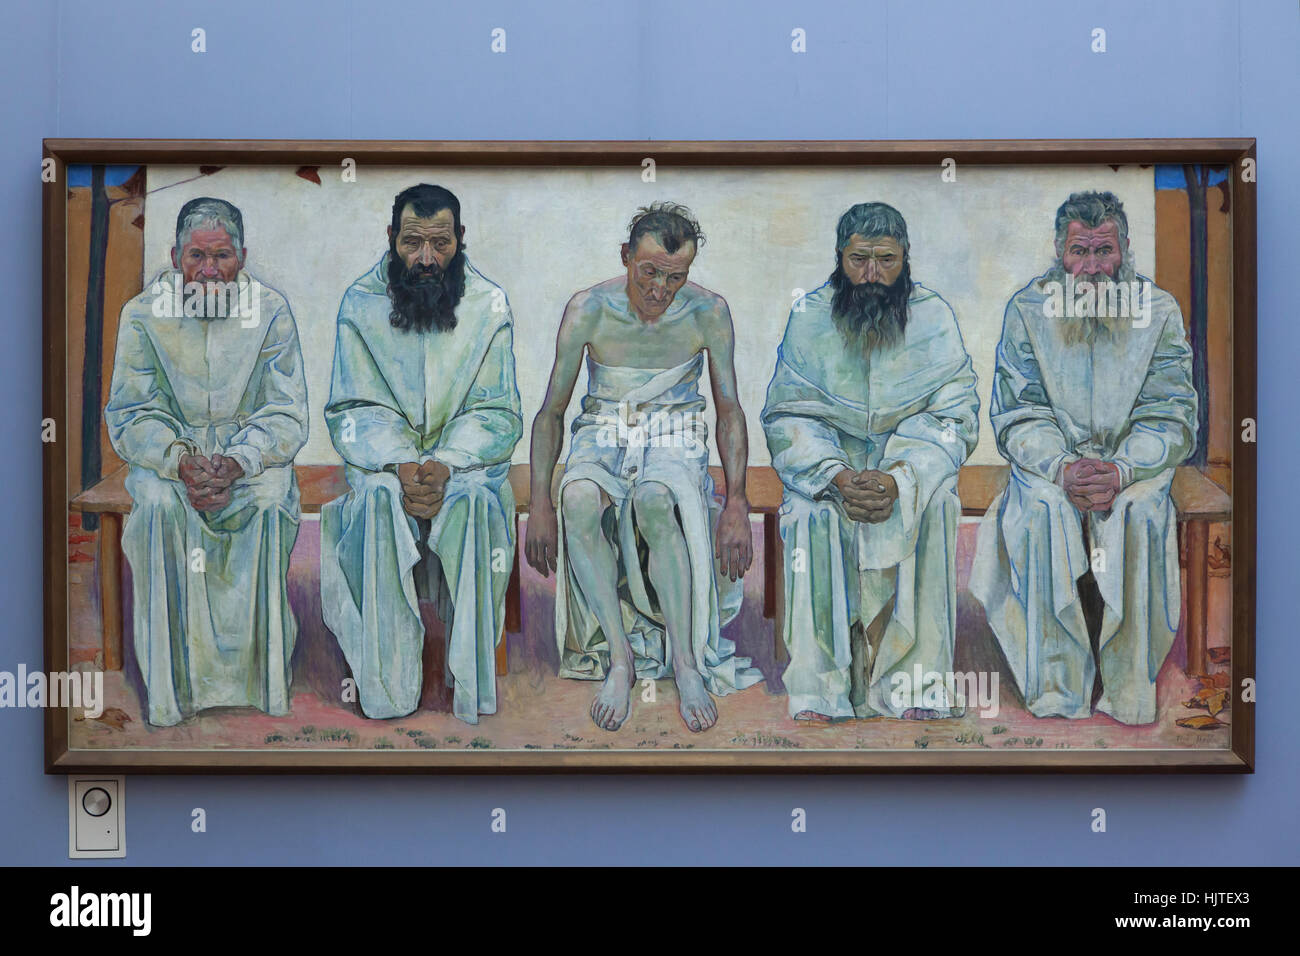 Painting Die Lebensmuden (Tired of Life, 1892) by Swiss symbolist painter Ferdinand Hodler on display in the Neue Pinakothek (New Pinacotheca) in Munich, Bavaria, Germany. Stock Photo